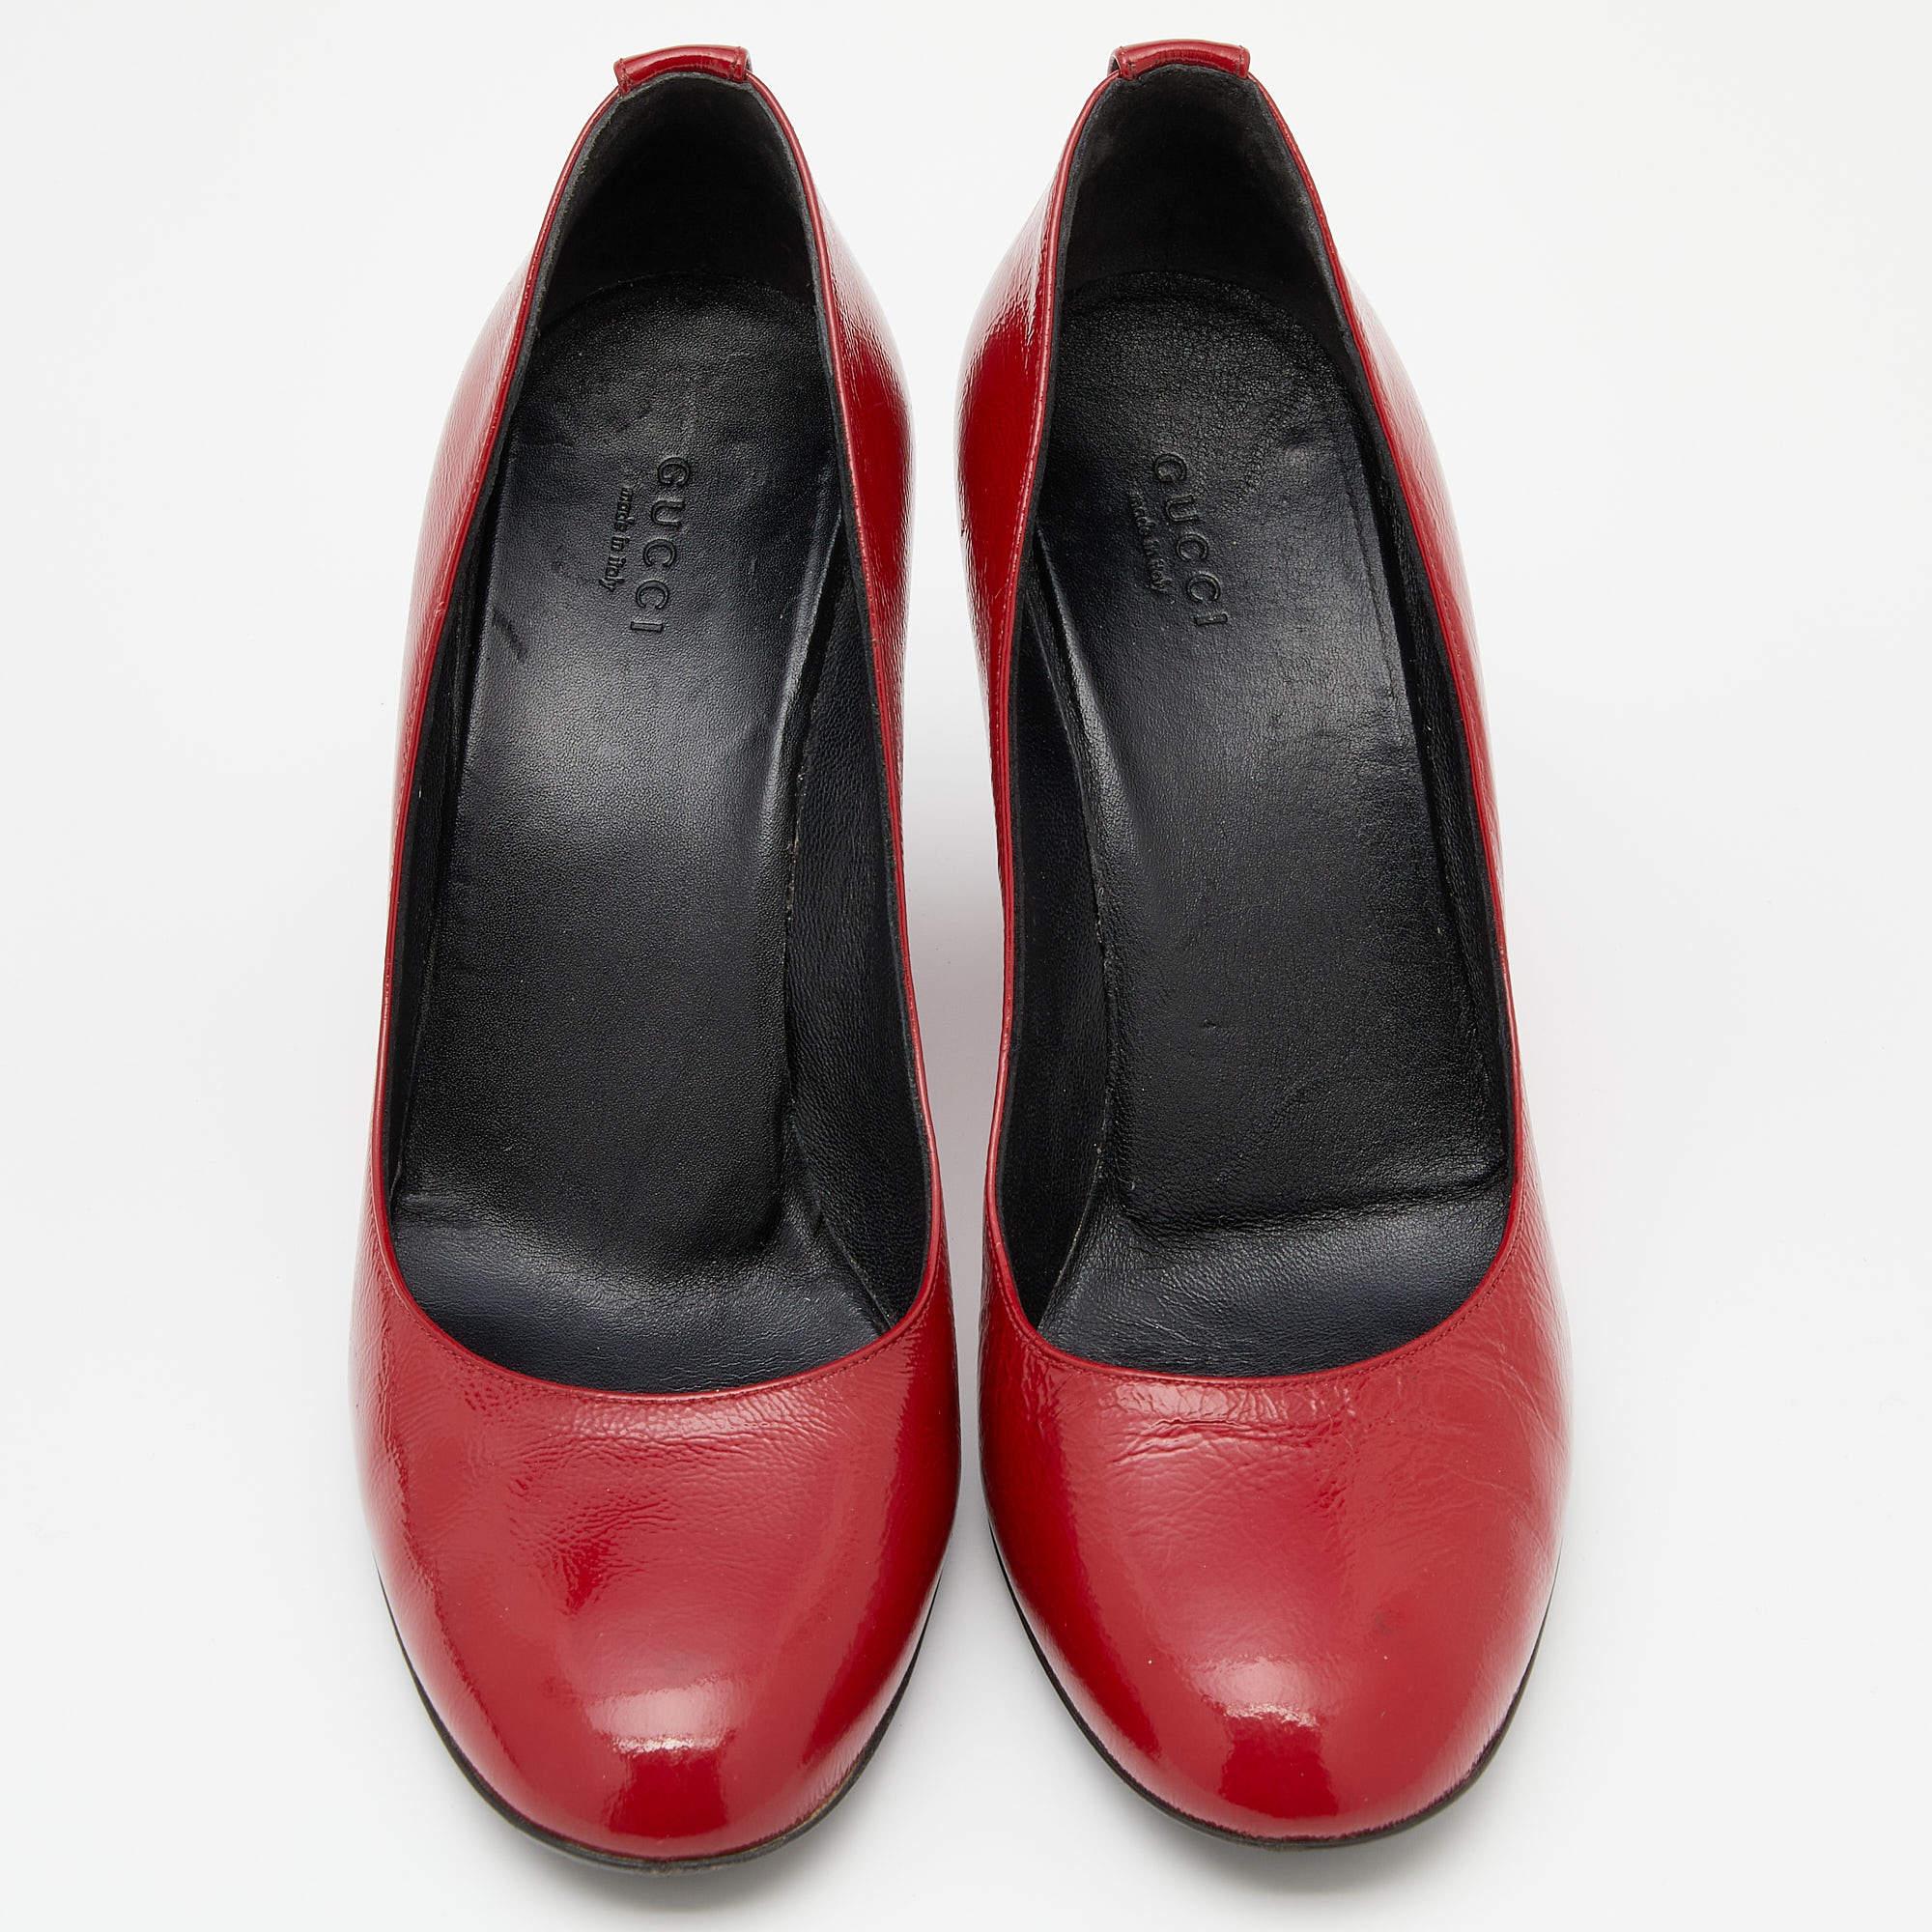 Gucci Red Patent Leather Wedge Round Toe Pumps Size 40 For Sale 2